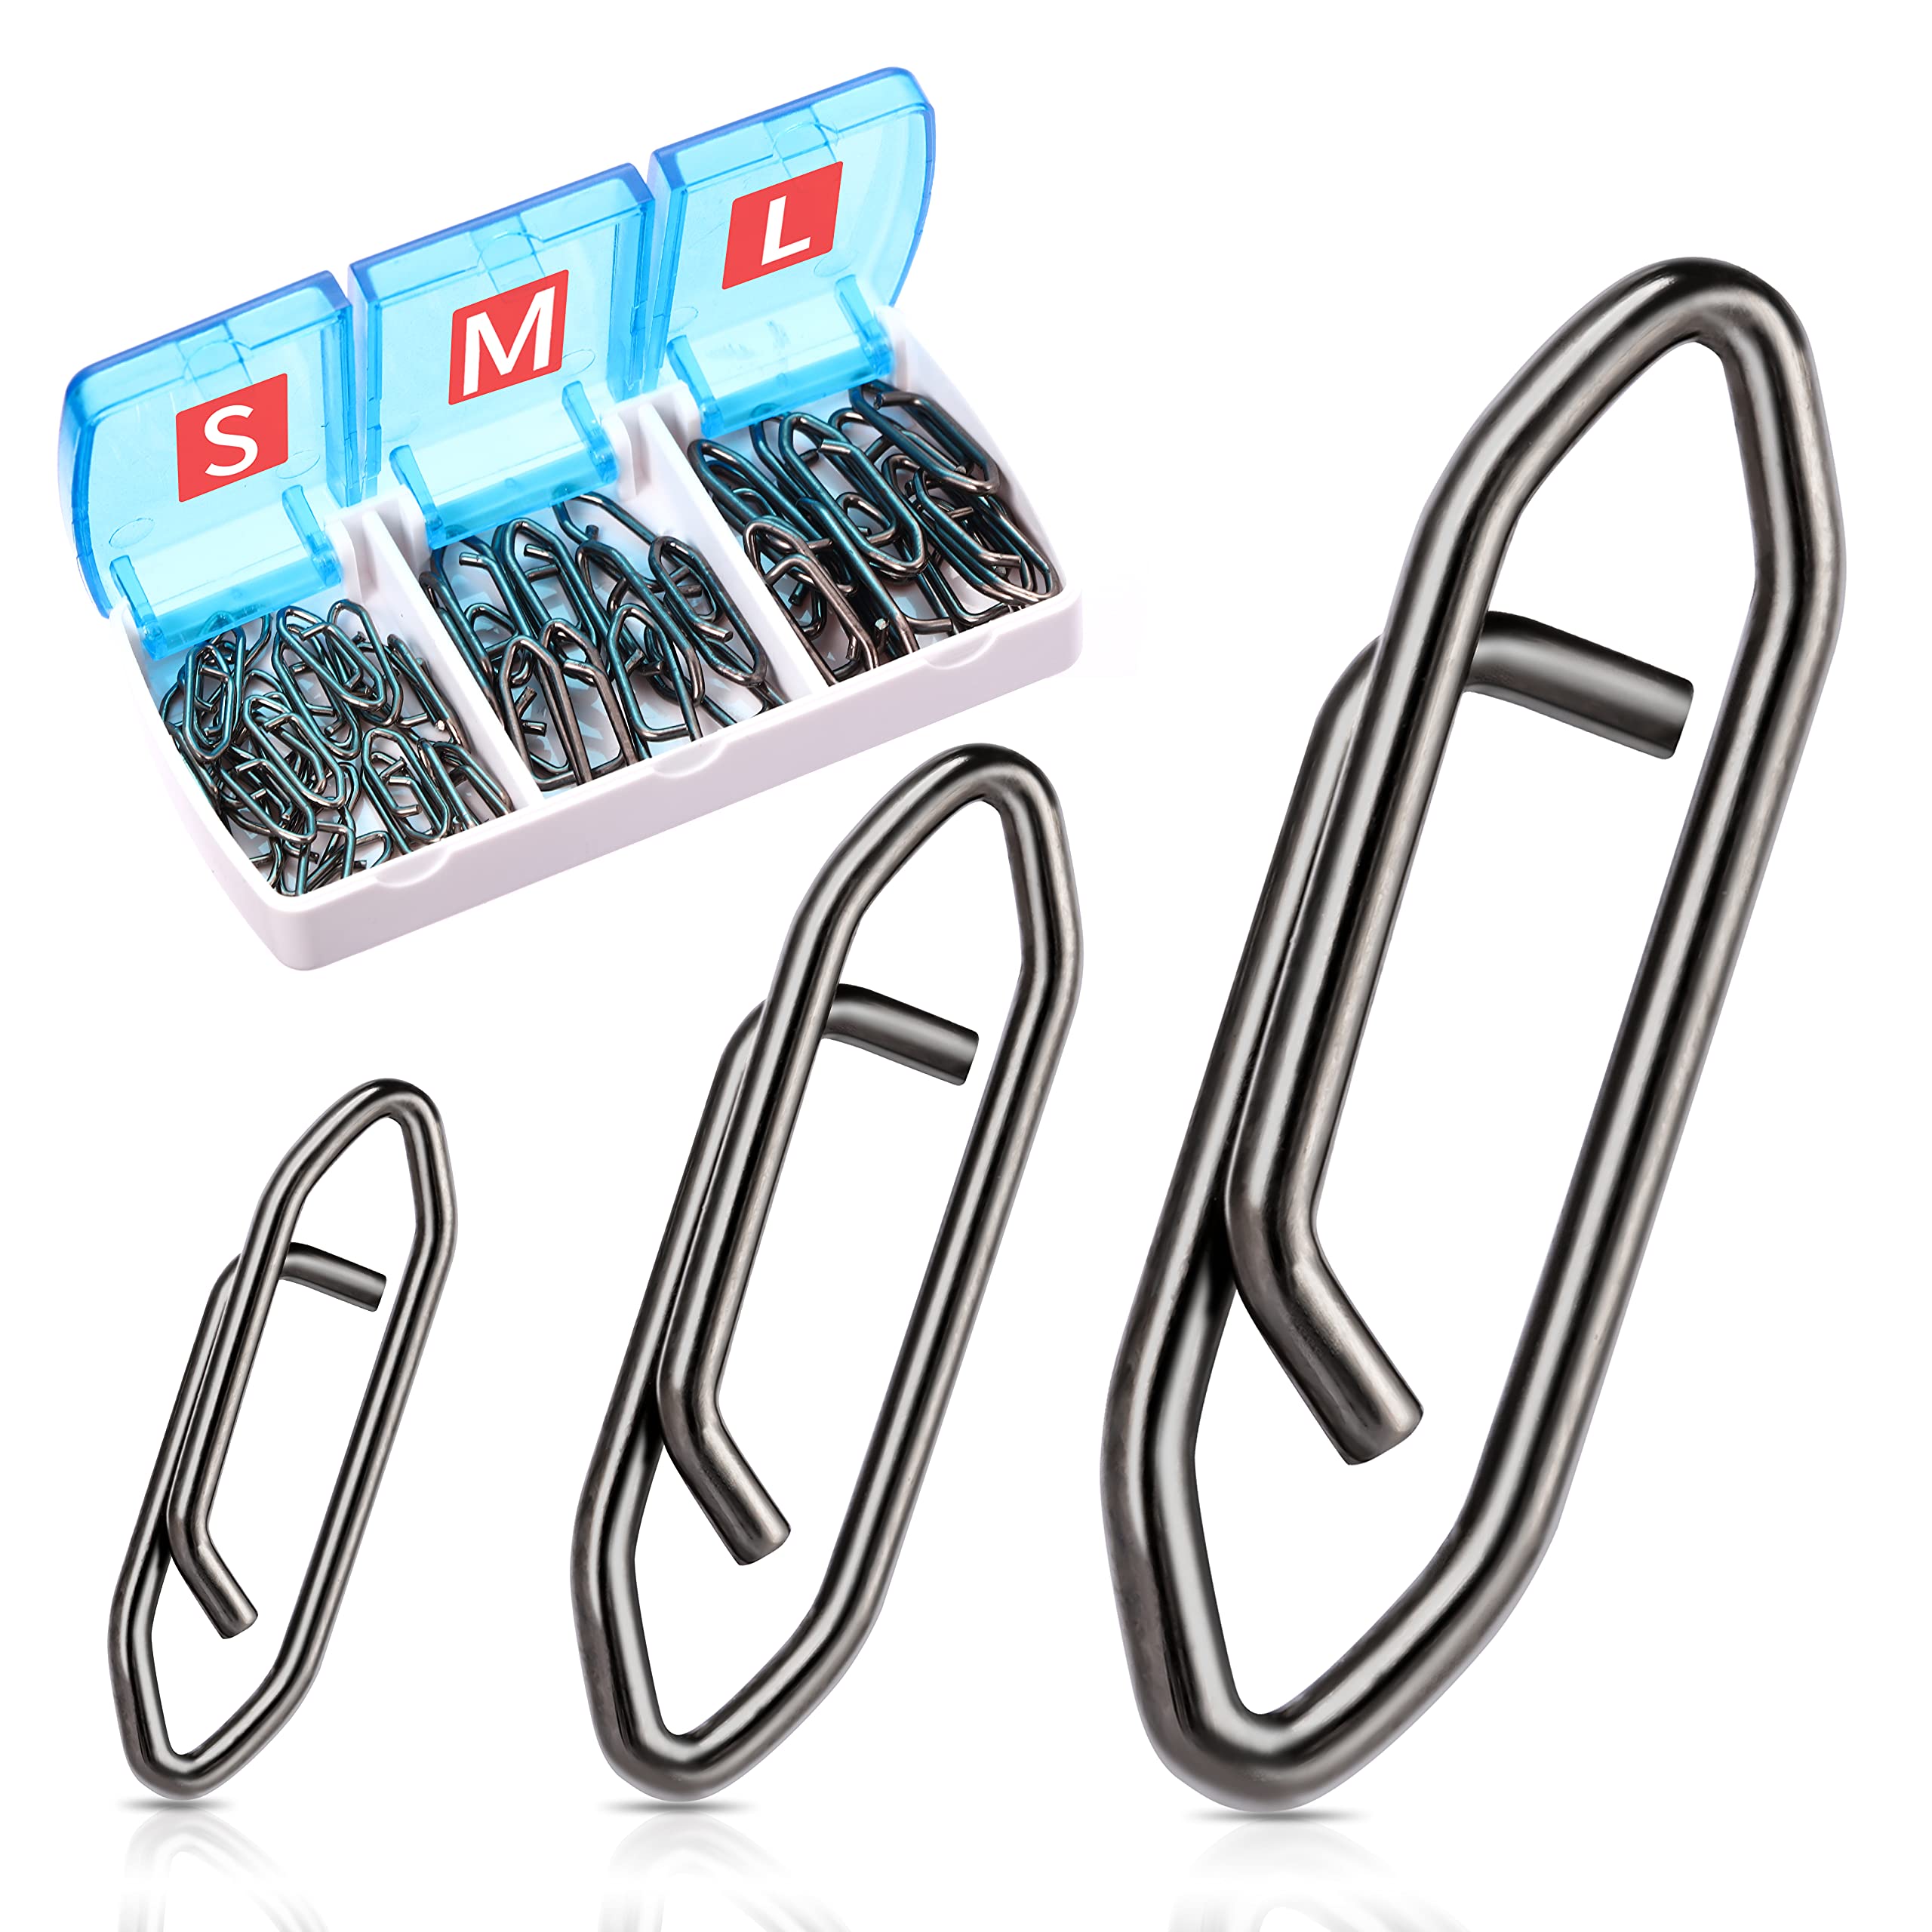 50pcs Tactical Anglers Power Clips - Strong and Durable Stainless Steel  Fishing Snaps for Quick and Easy Lure Changes